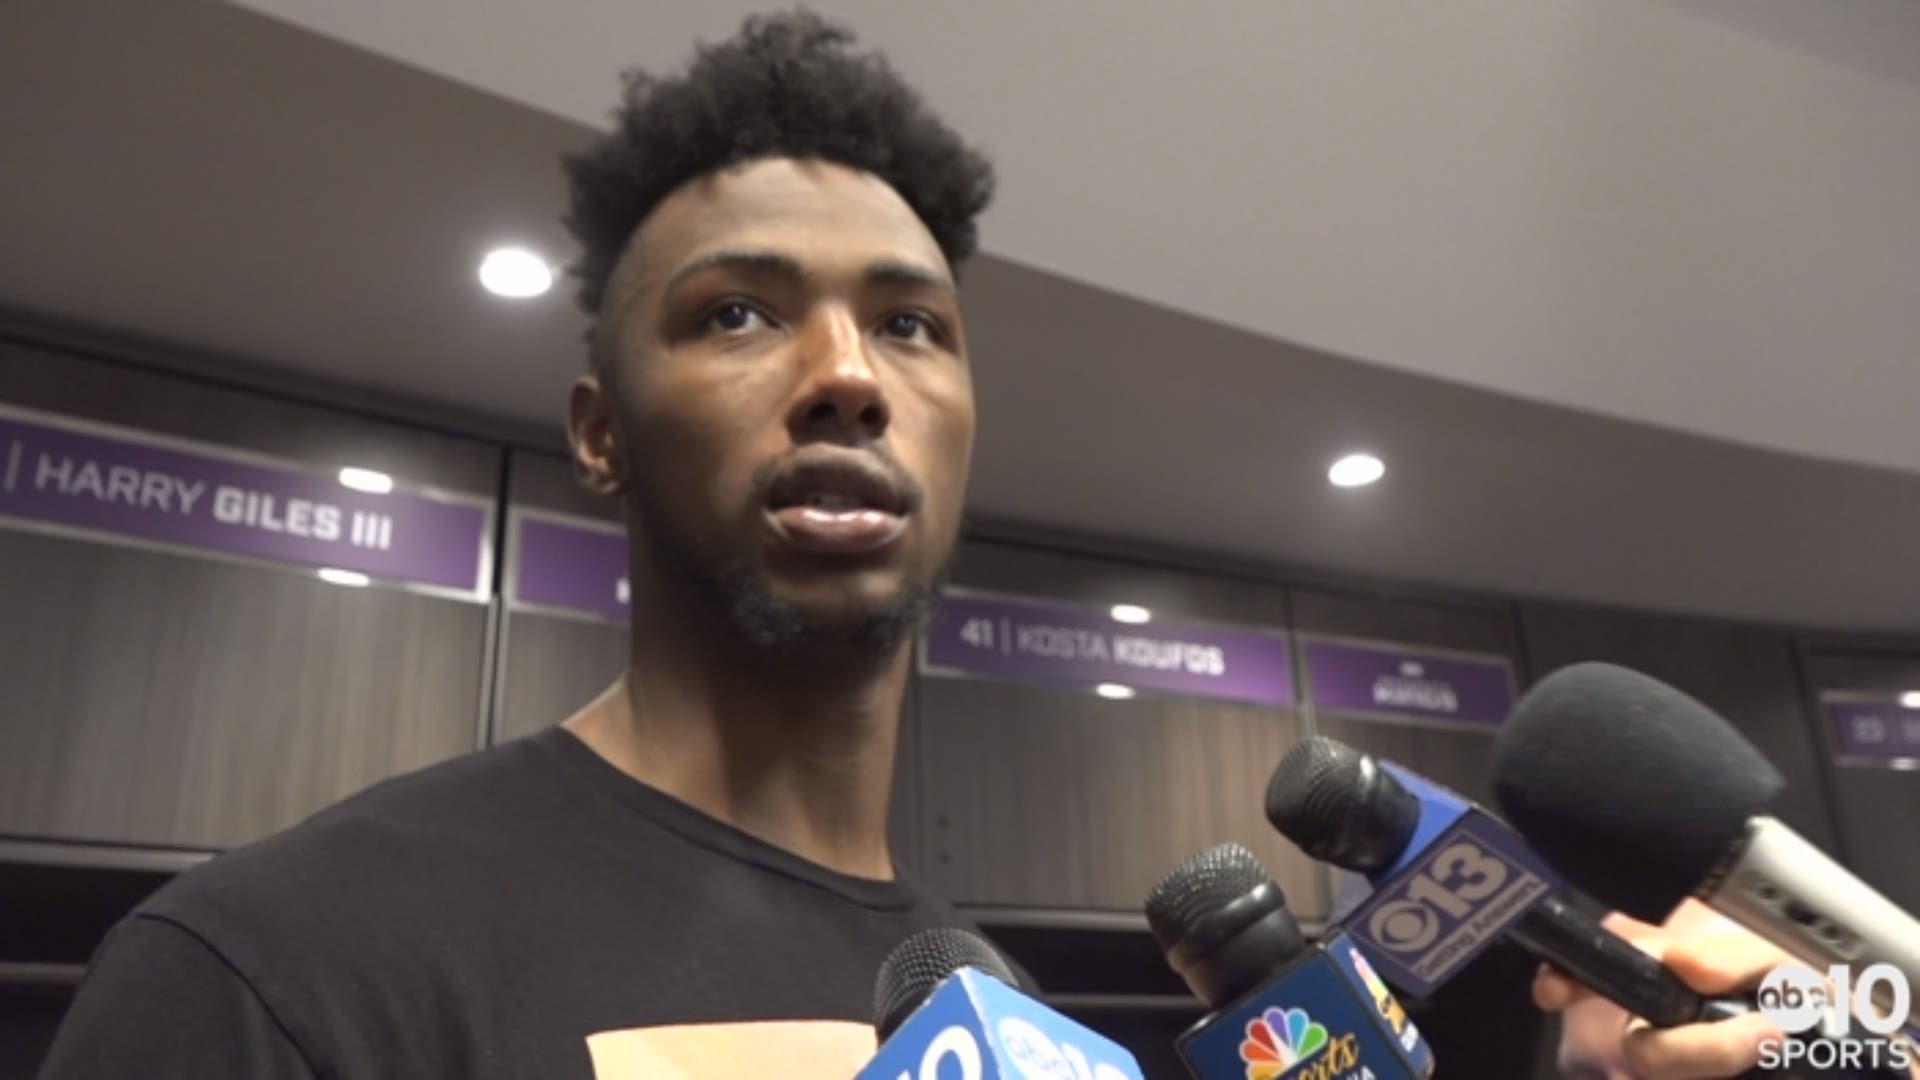 Kings F/C Harry Giles talks about Monday's victory over the Portland Trail Blazers, his team getting revenge from the overtime loss suffered a little more than two weeks ago, the bench production from his team and the upcoming long road trip.